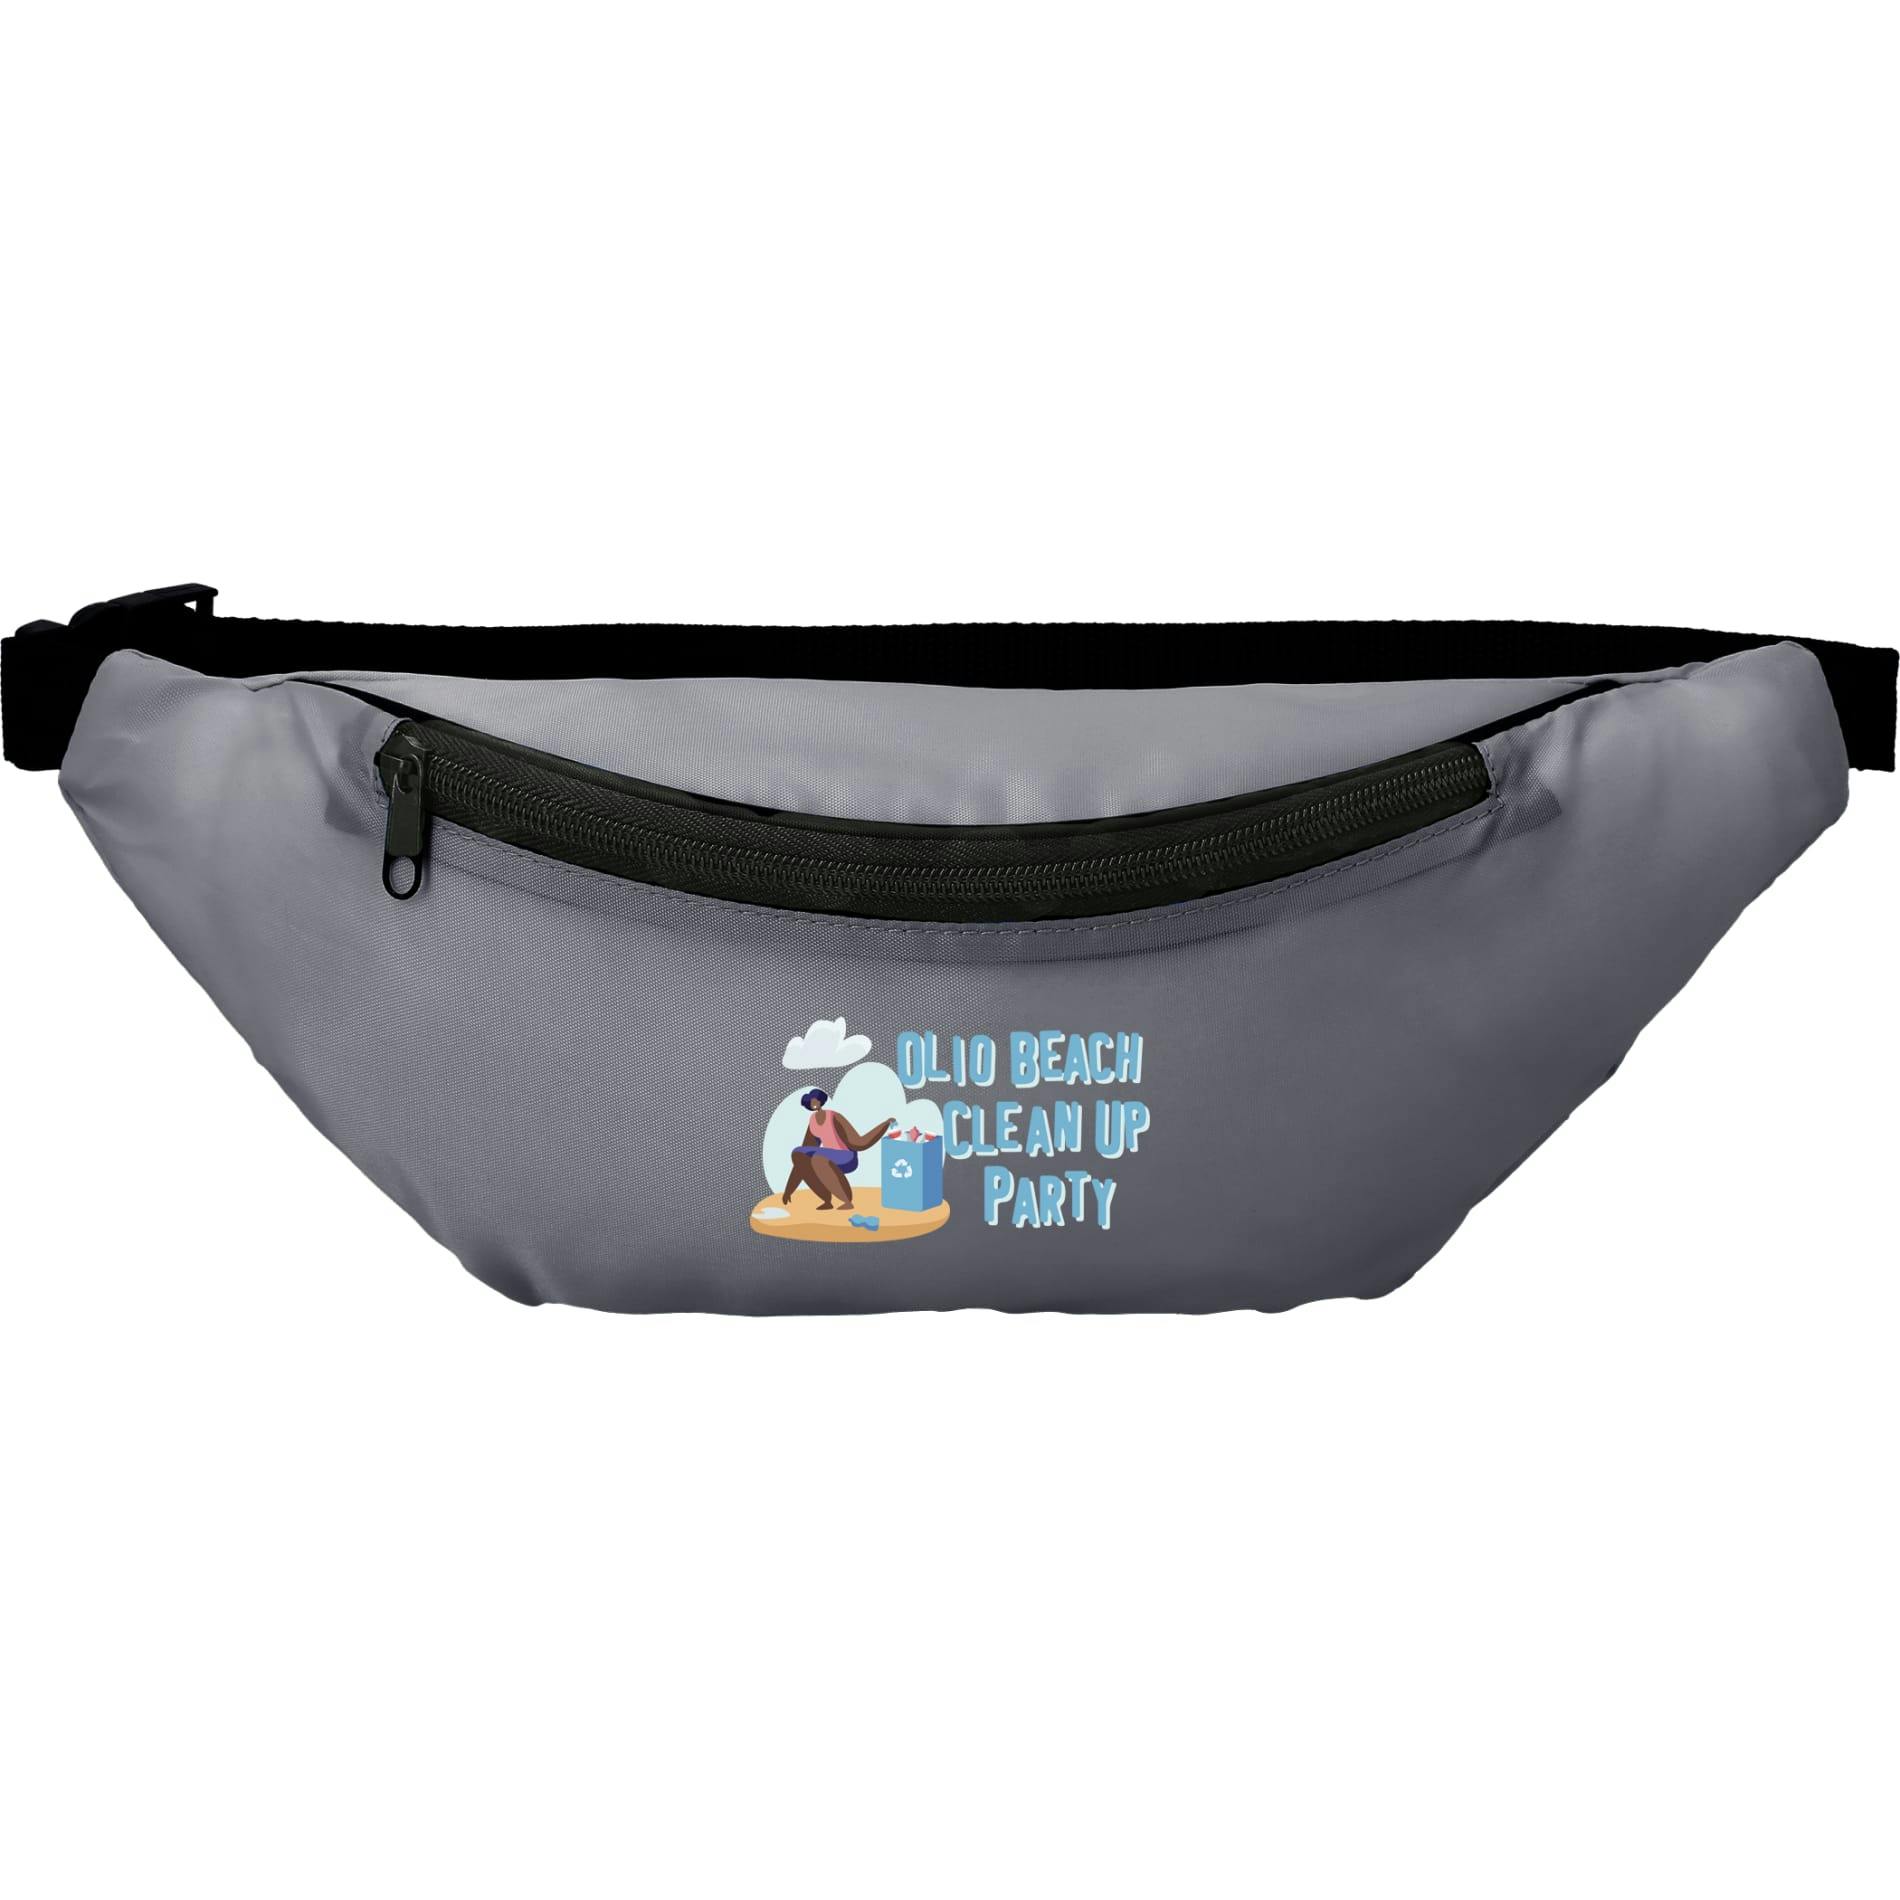 Hipster Recycled rPET Fanny Pack - additional Image 1